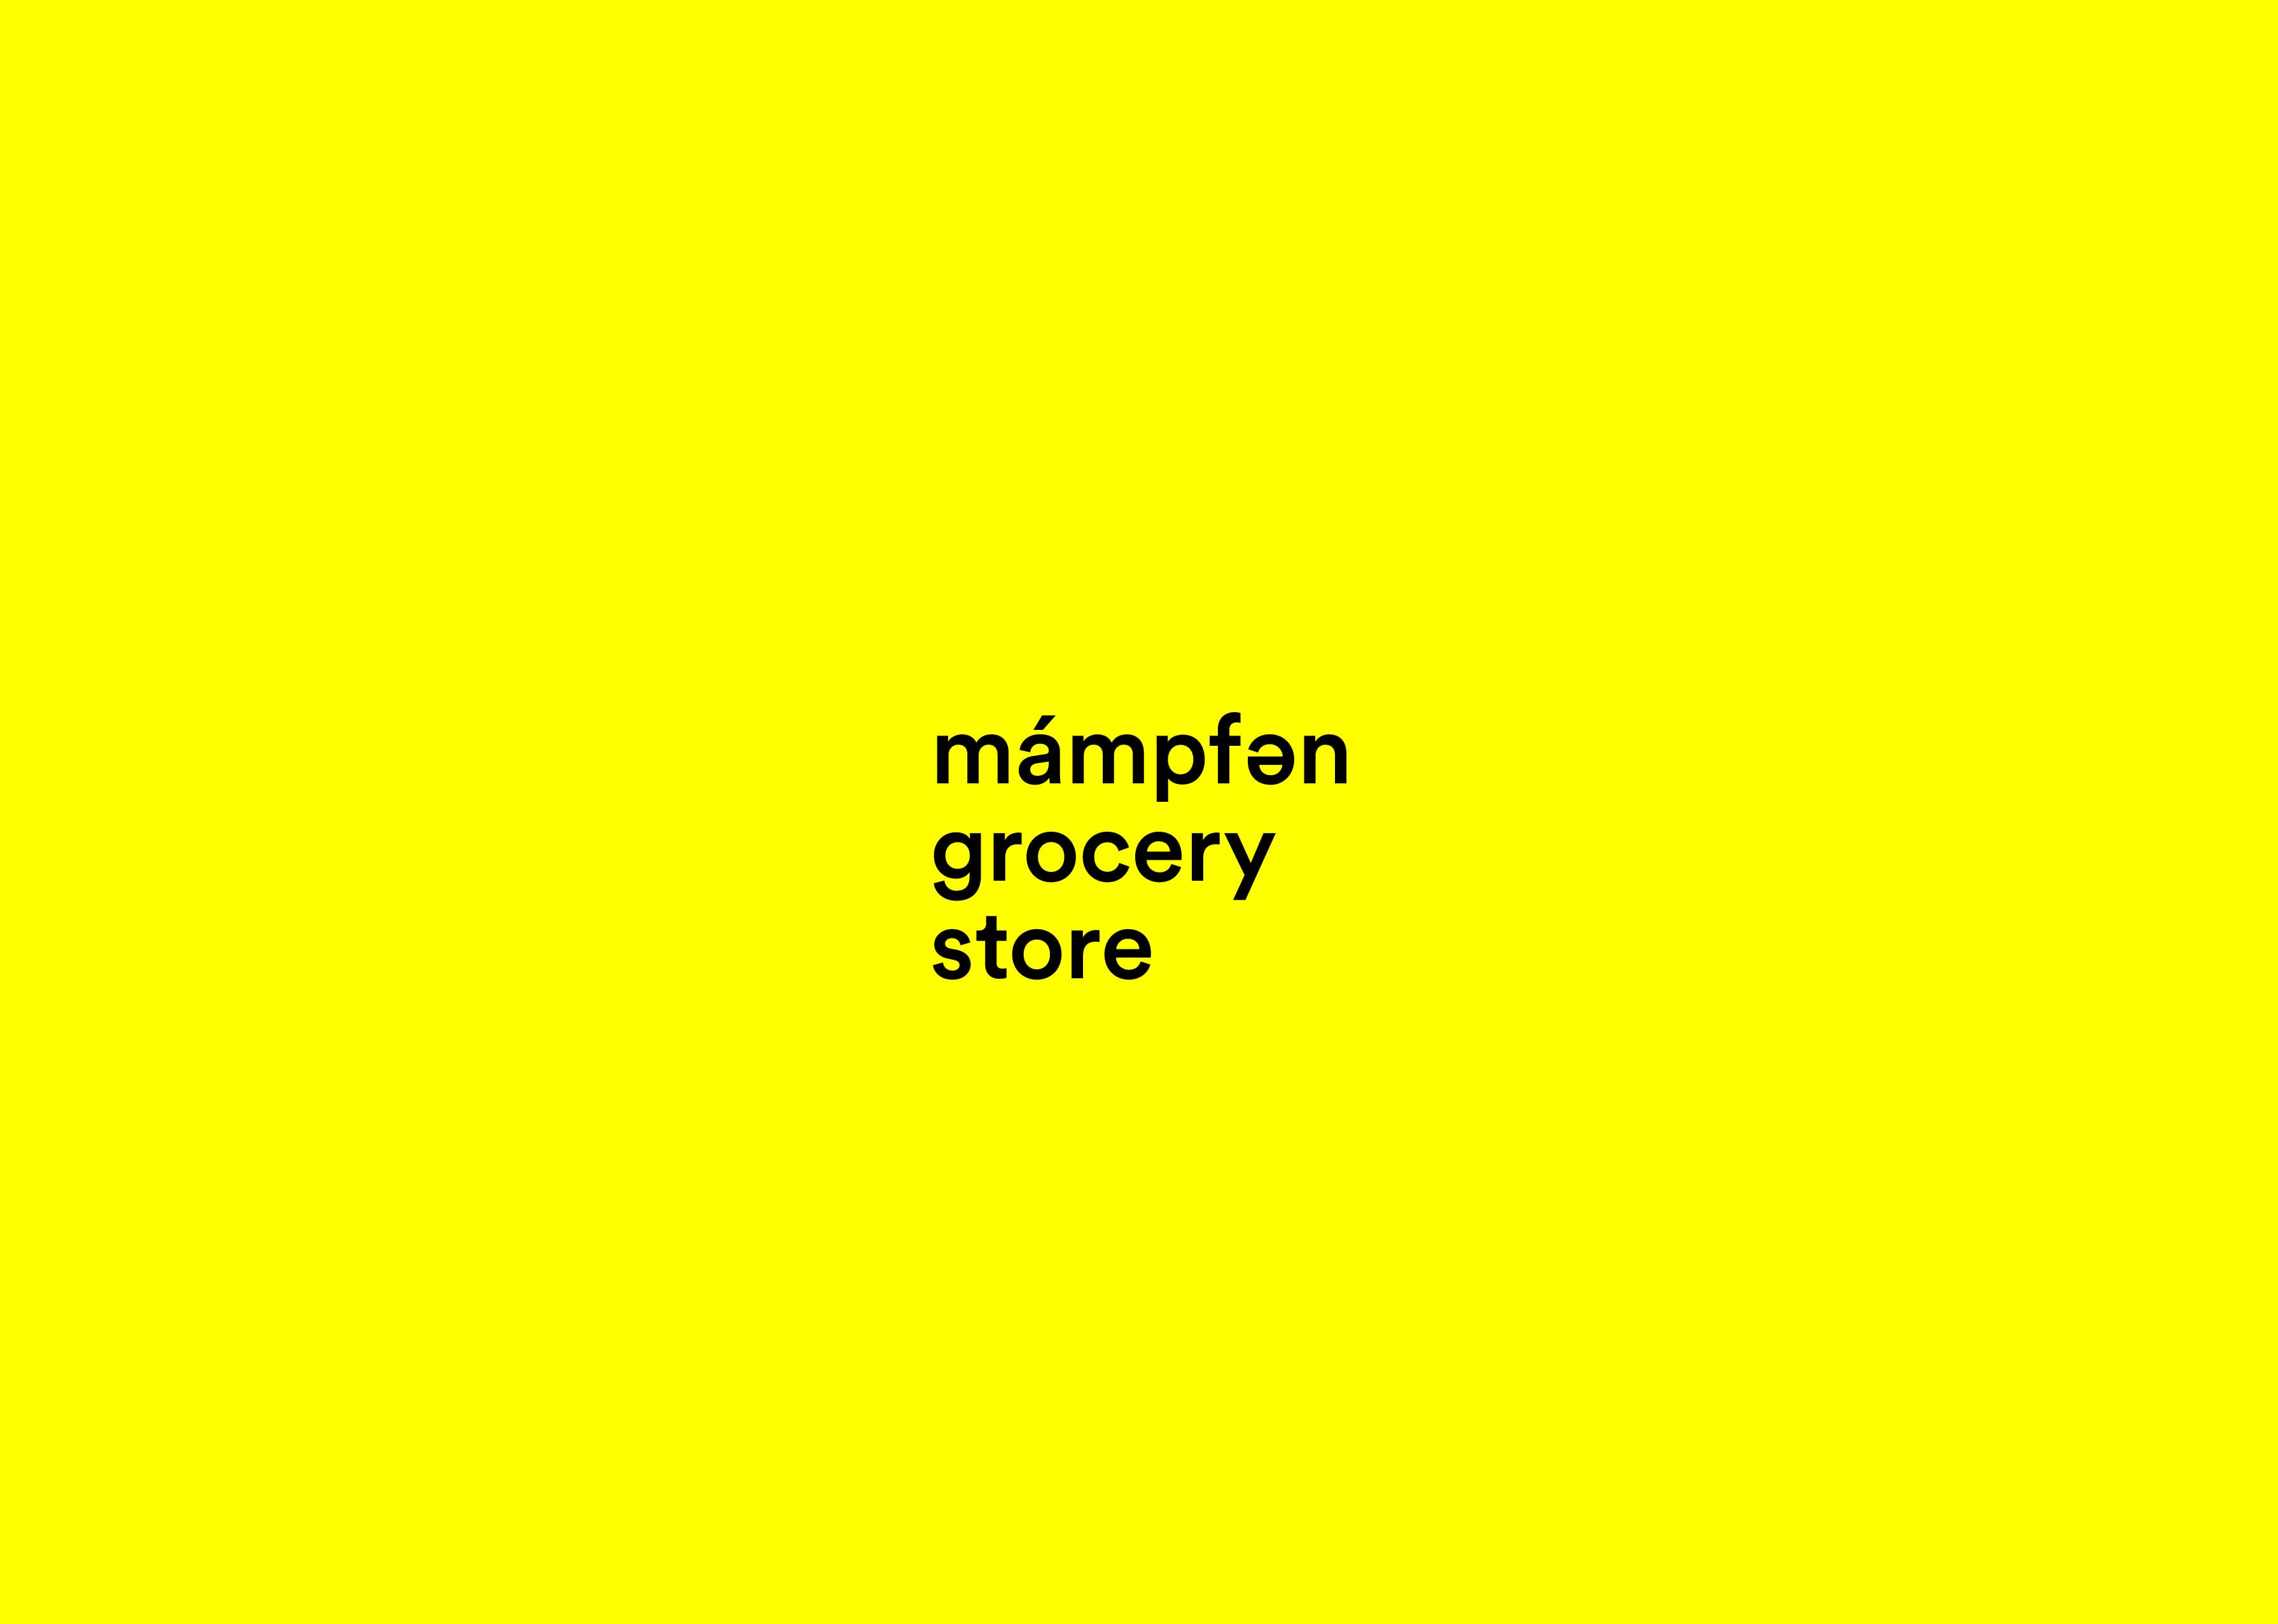 mampfengrocerystore